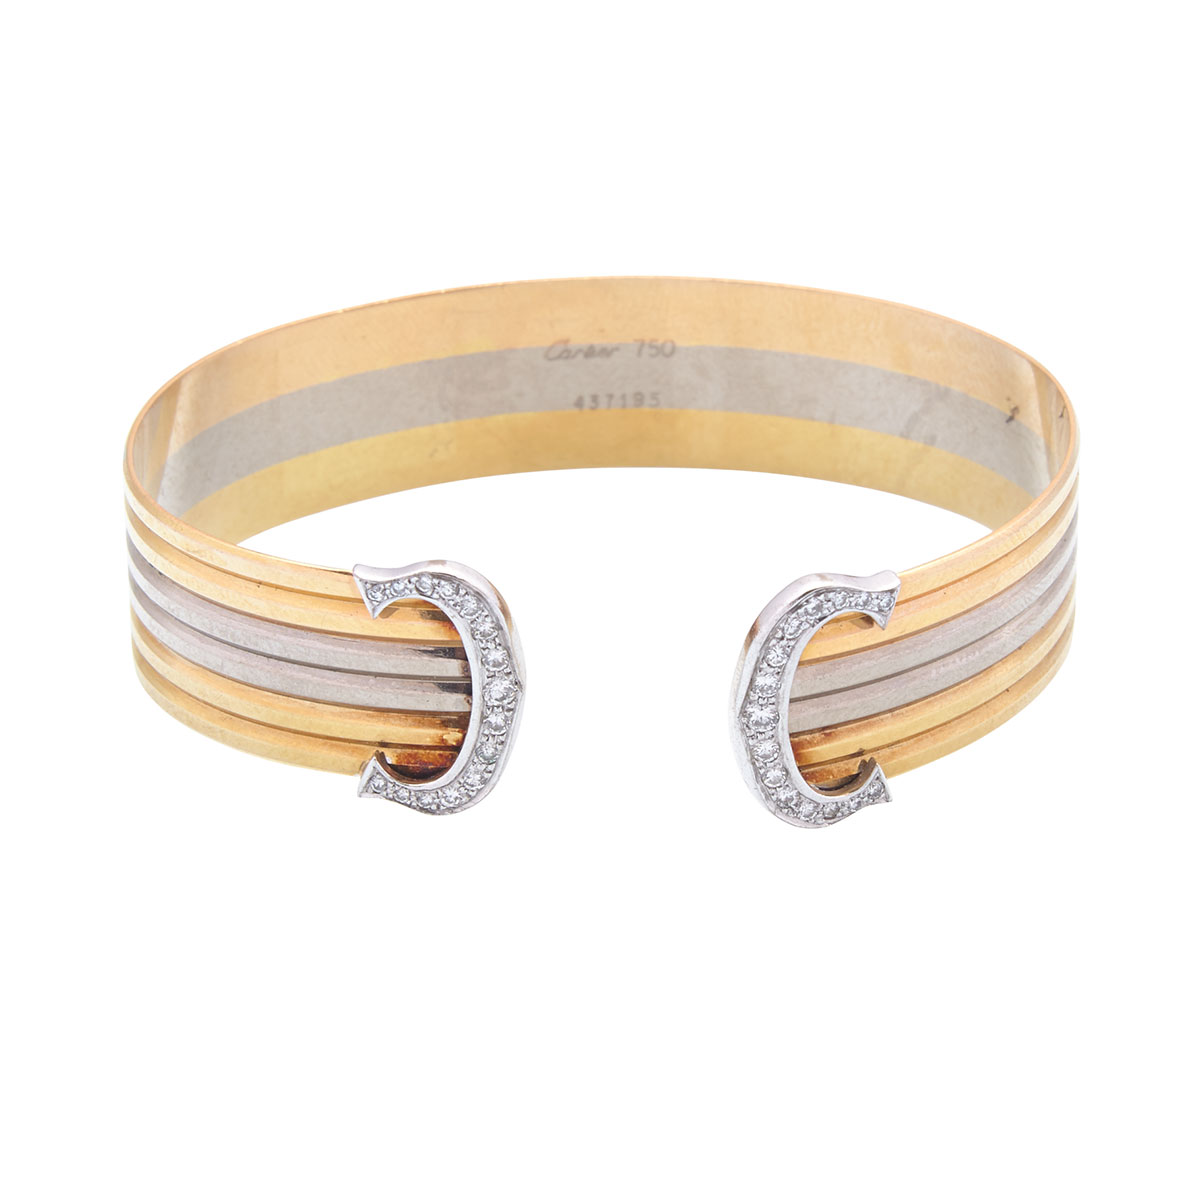 Cartier 18k Yellow And White Gold Open Bangle